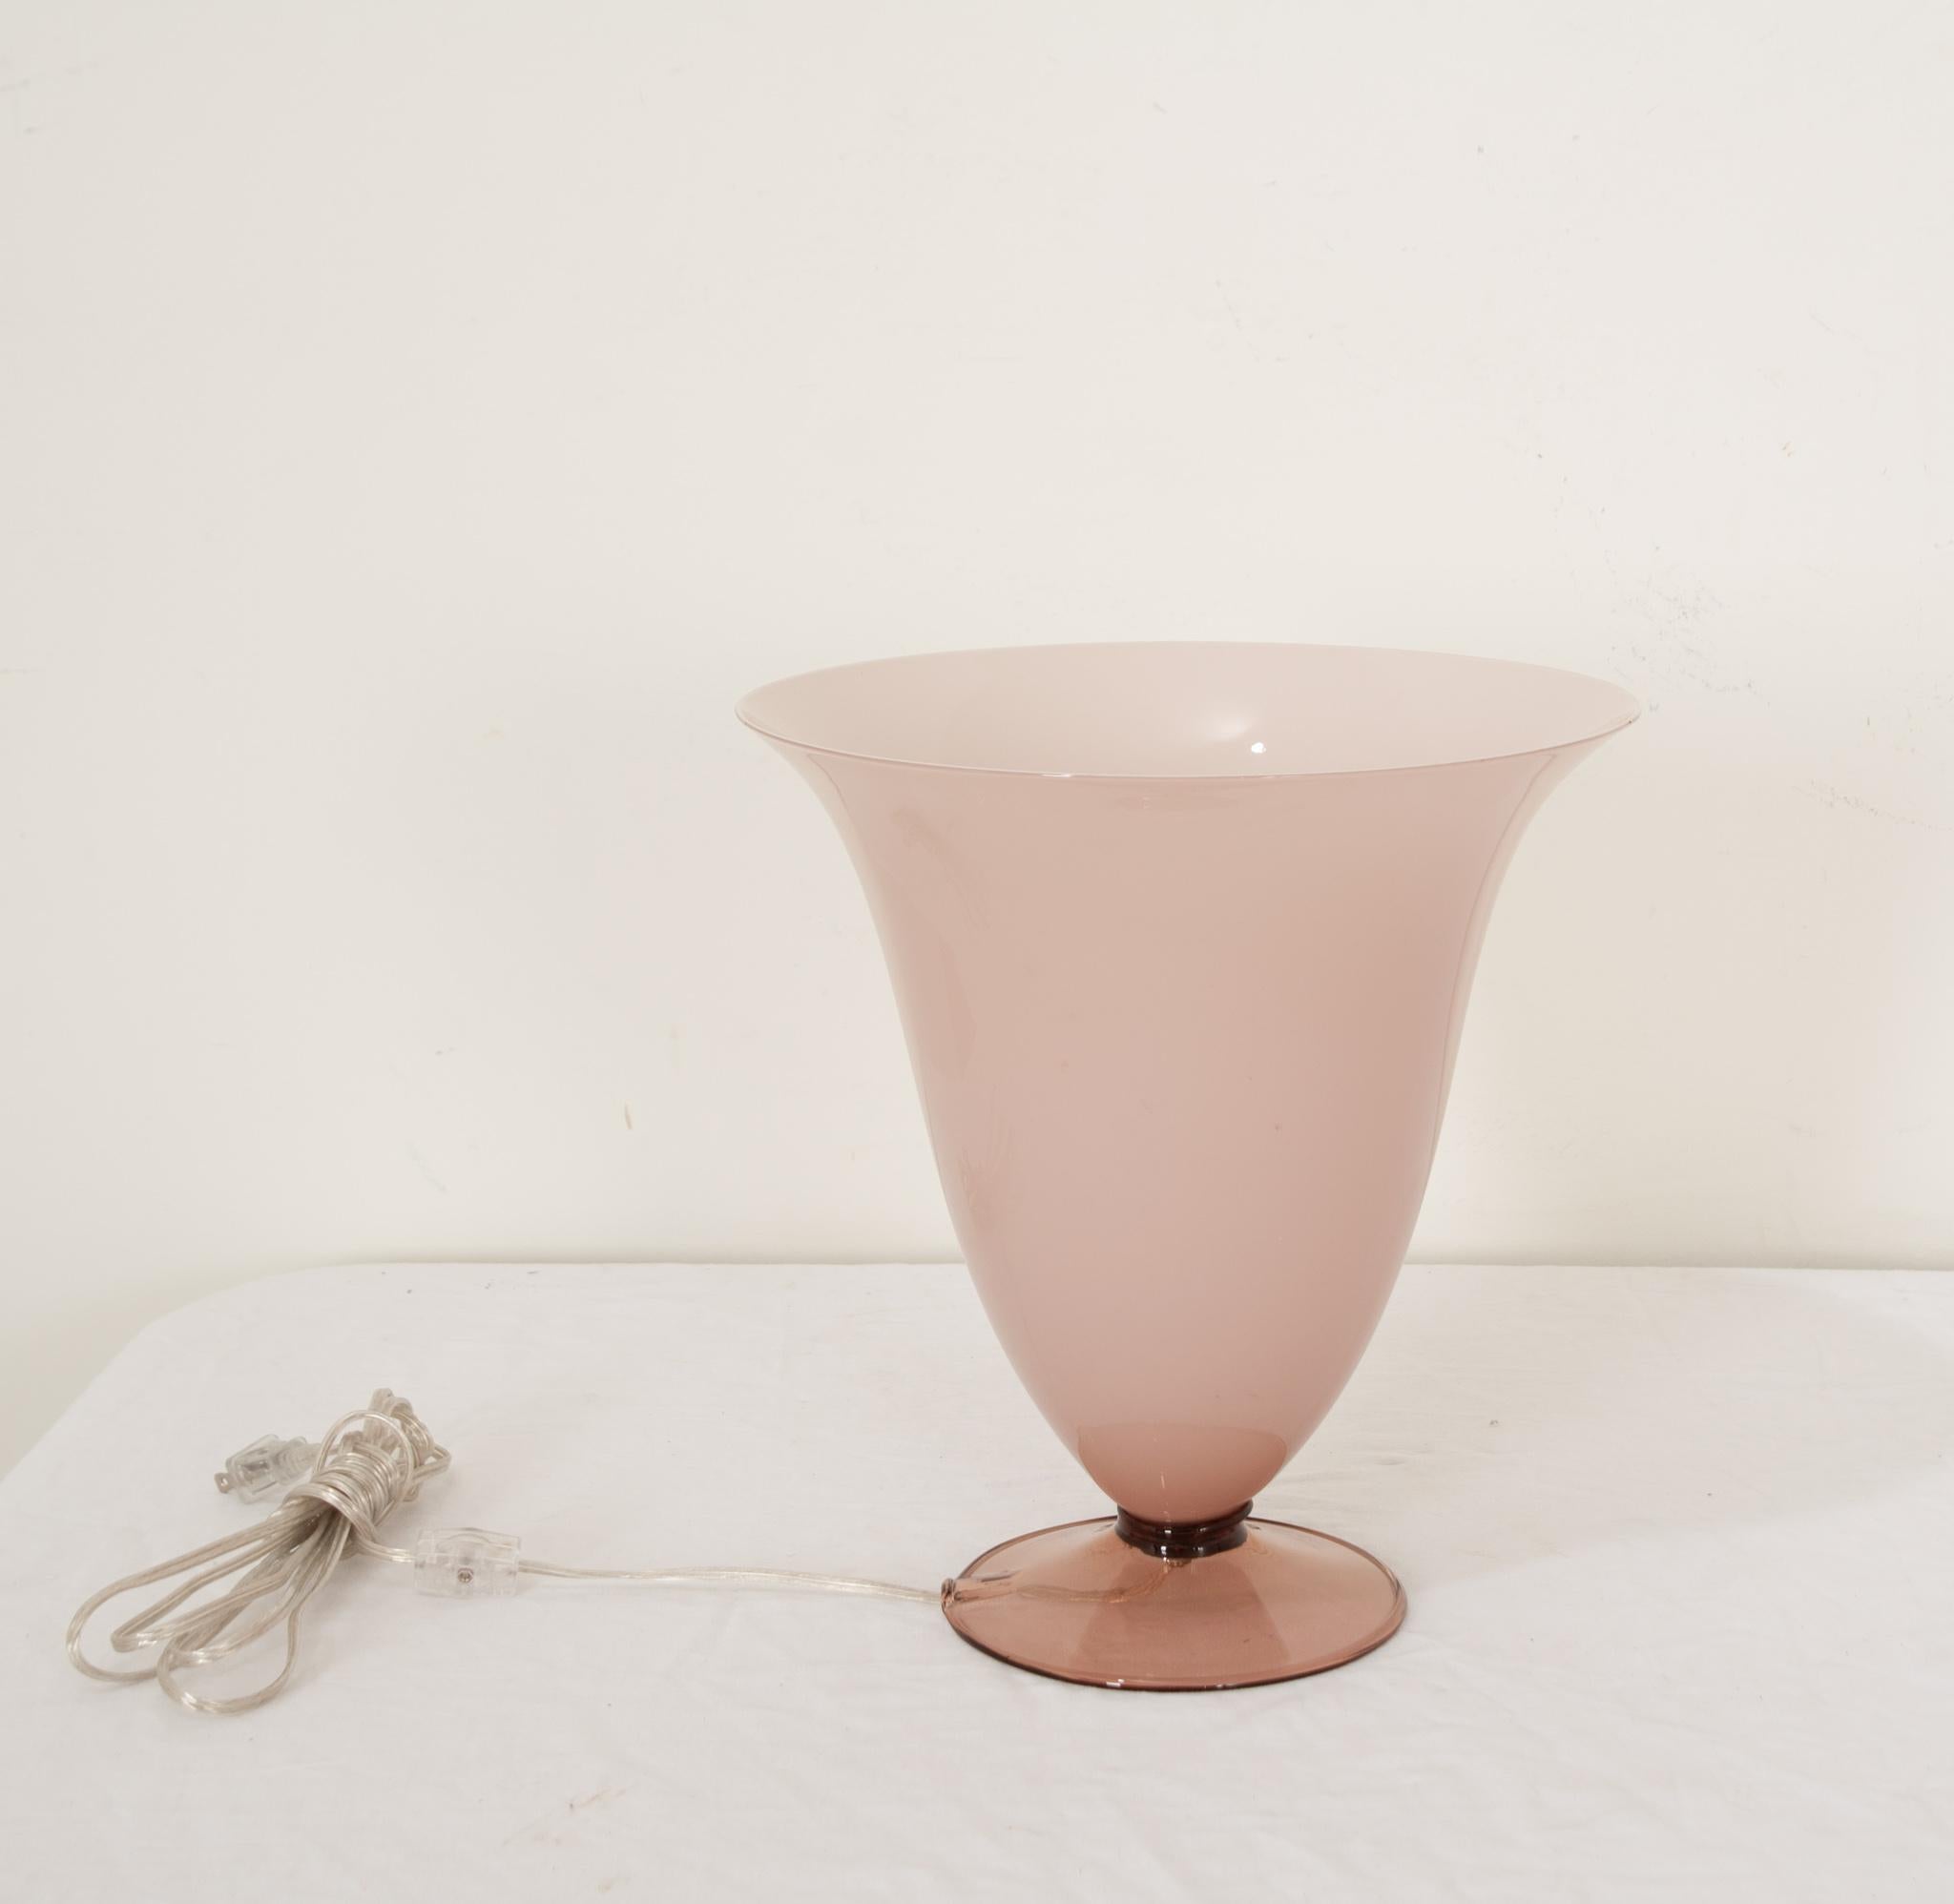 A vintage Italian Murano glass tulip shaped table lamp. Hand blown and very fine, it features a delicate pink translucent milk glass shade offset with a band of black detailing around a lustrous transparent l’aubergine colored base.  The bottom of